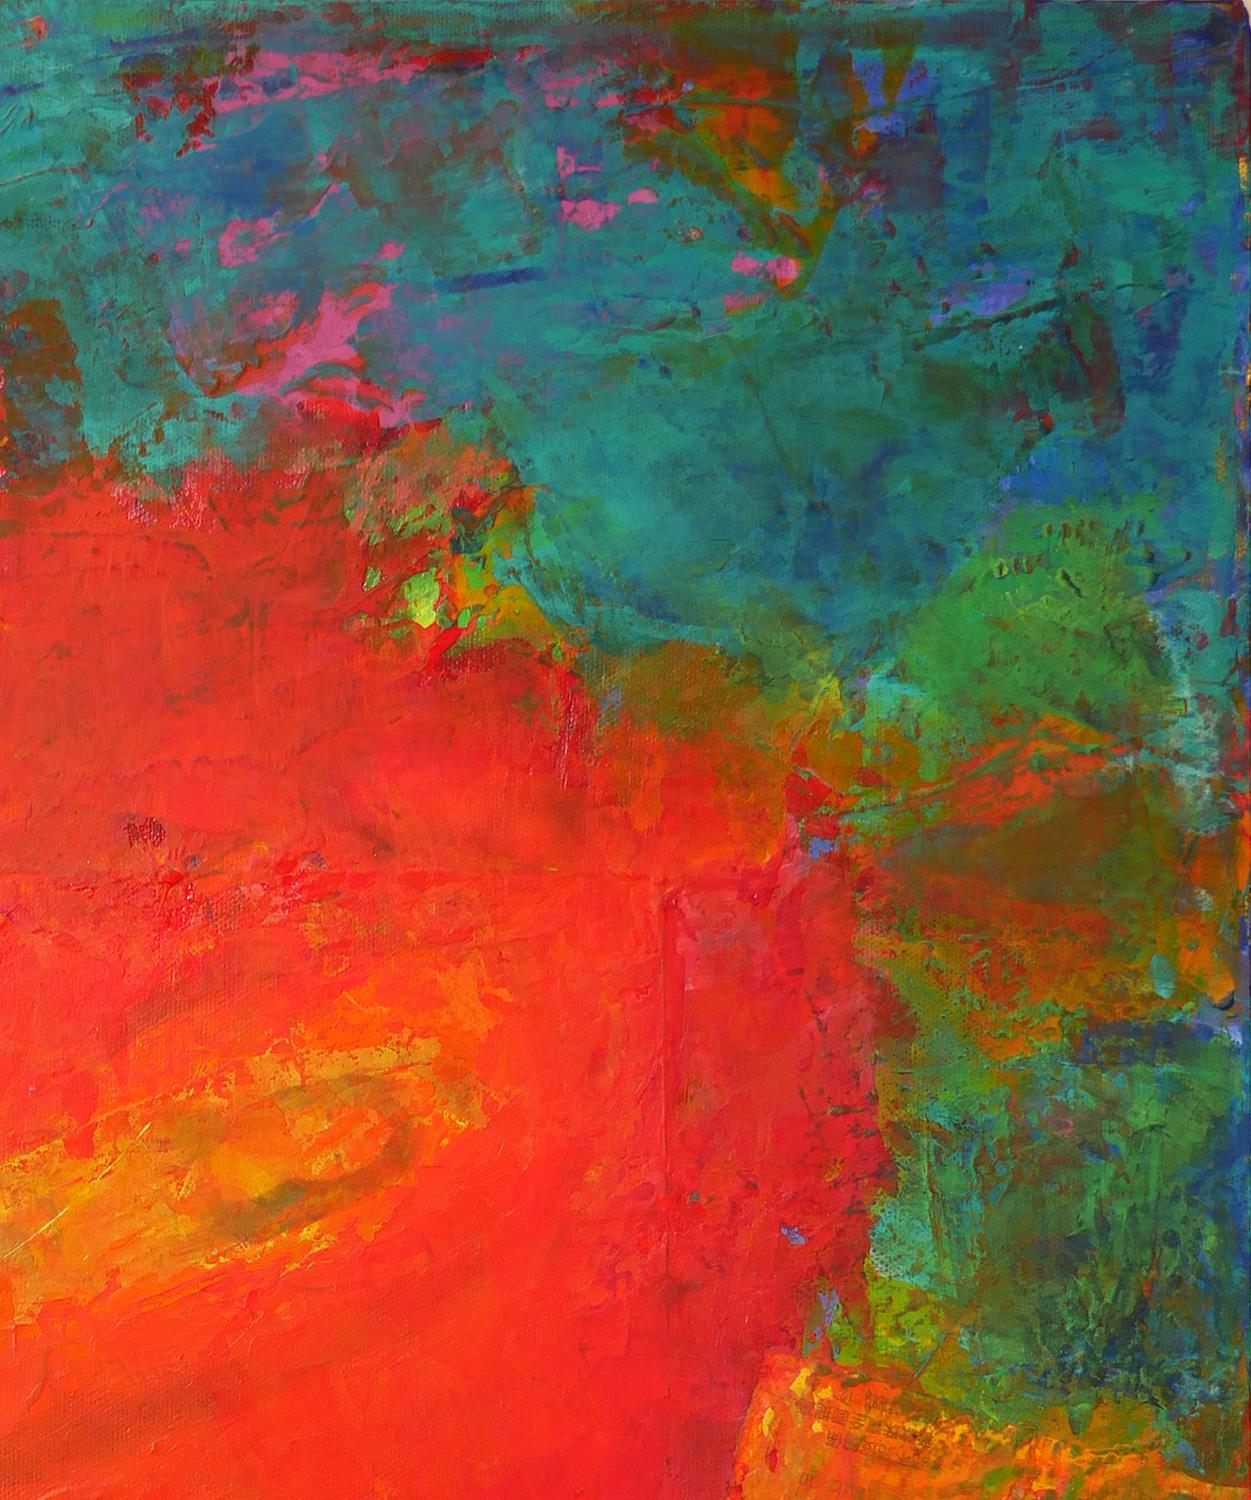 Colorful red, blue, and green abstract expressionist painting by Houston, TX based artist Phyllis Flax. The work features large areas of color bleeding into each other with various newsprint clippings and photographs incorporated throughout. Signed,